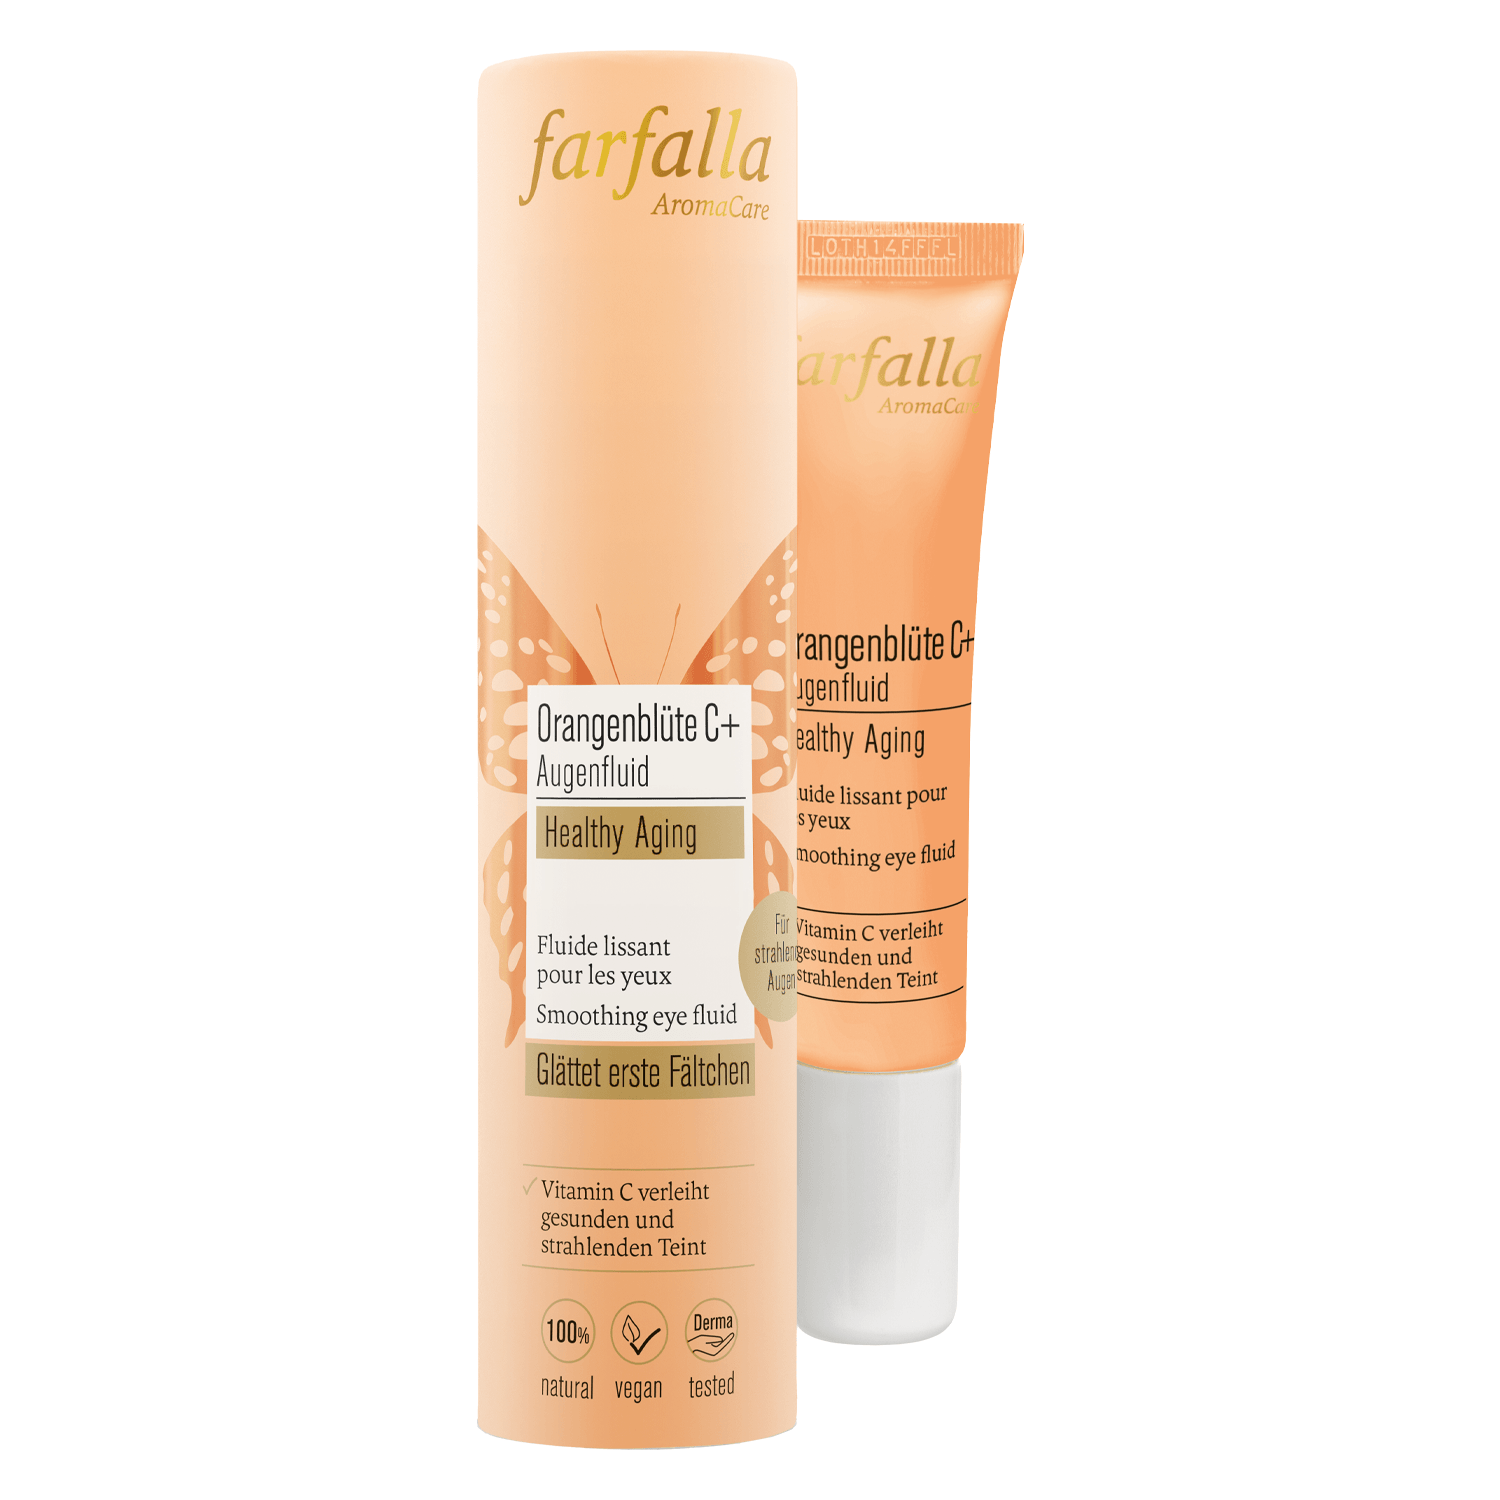 Product image from Farfalla Care - Orangenblüte C+ Augenfluid Healthy Aging